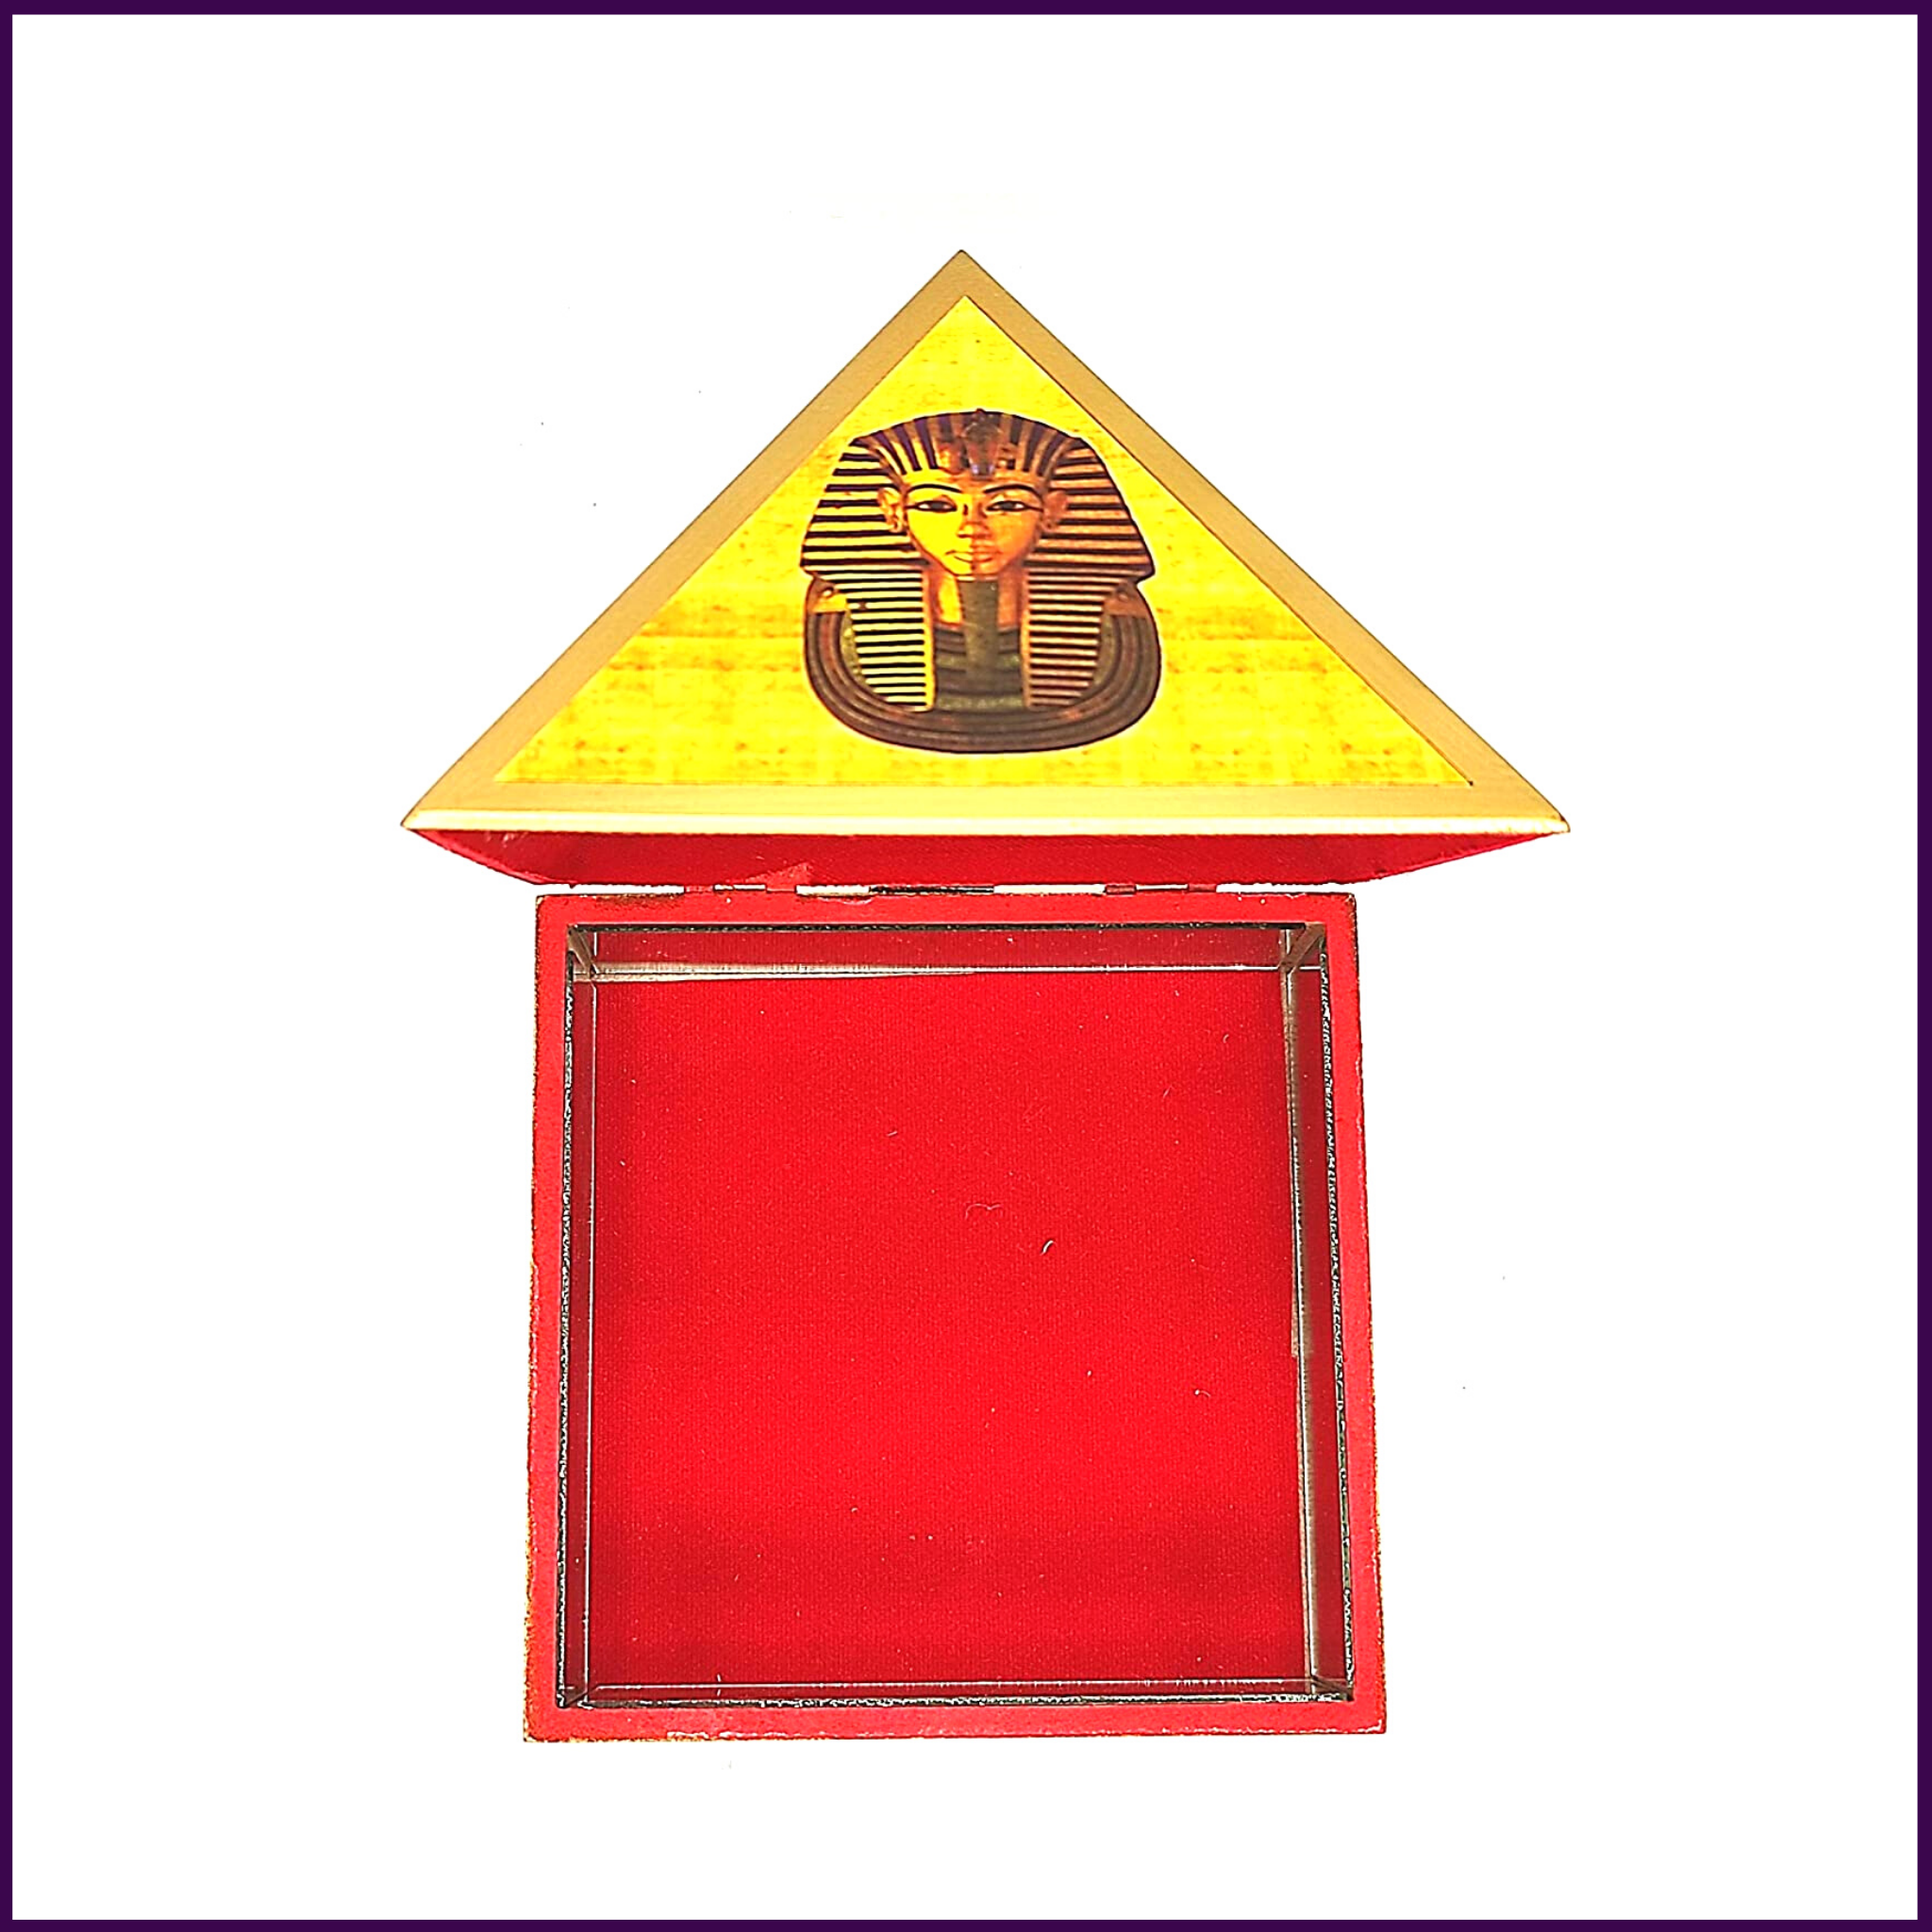 6inch Base - Wish | Cash MDF Wooden Pyramid Box with Egyptian Stickers - 51pyramids